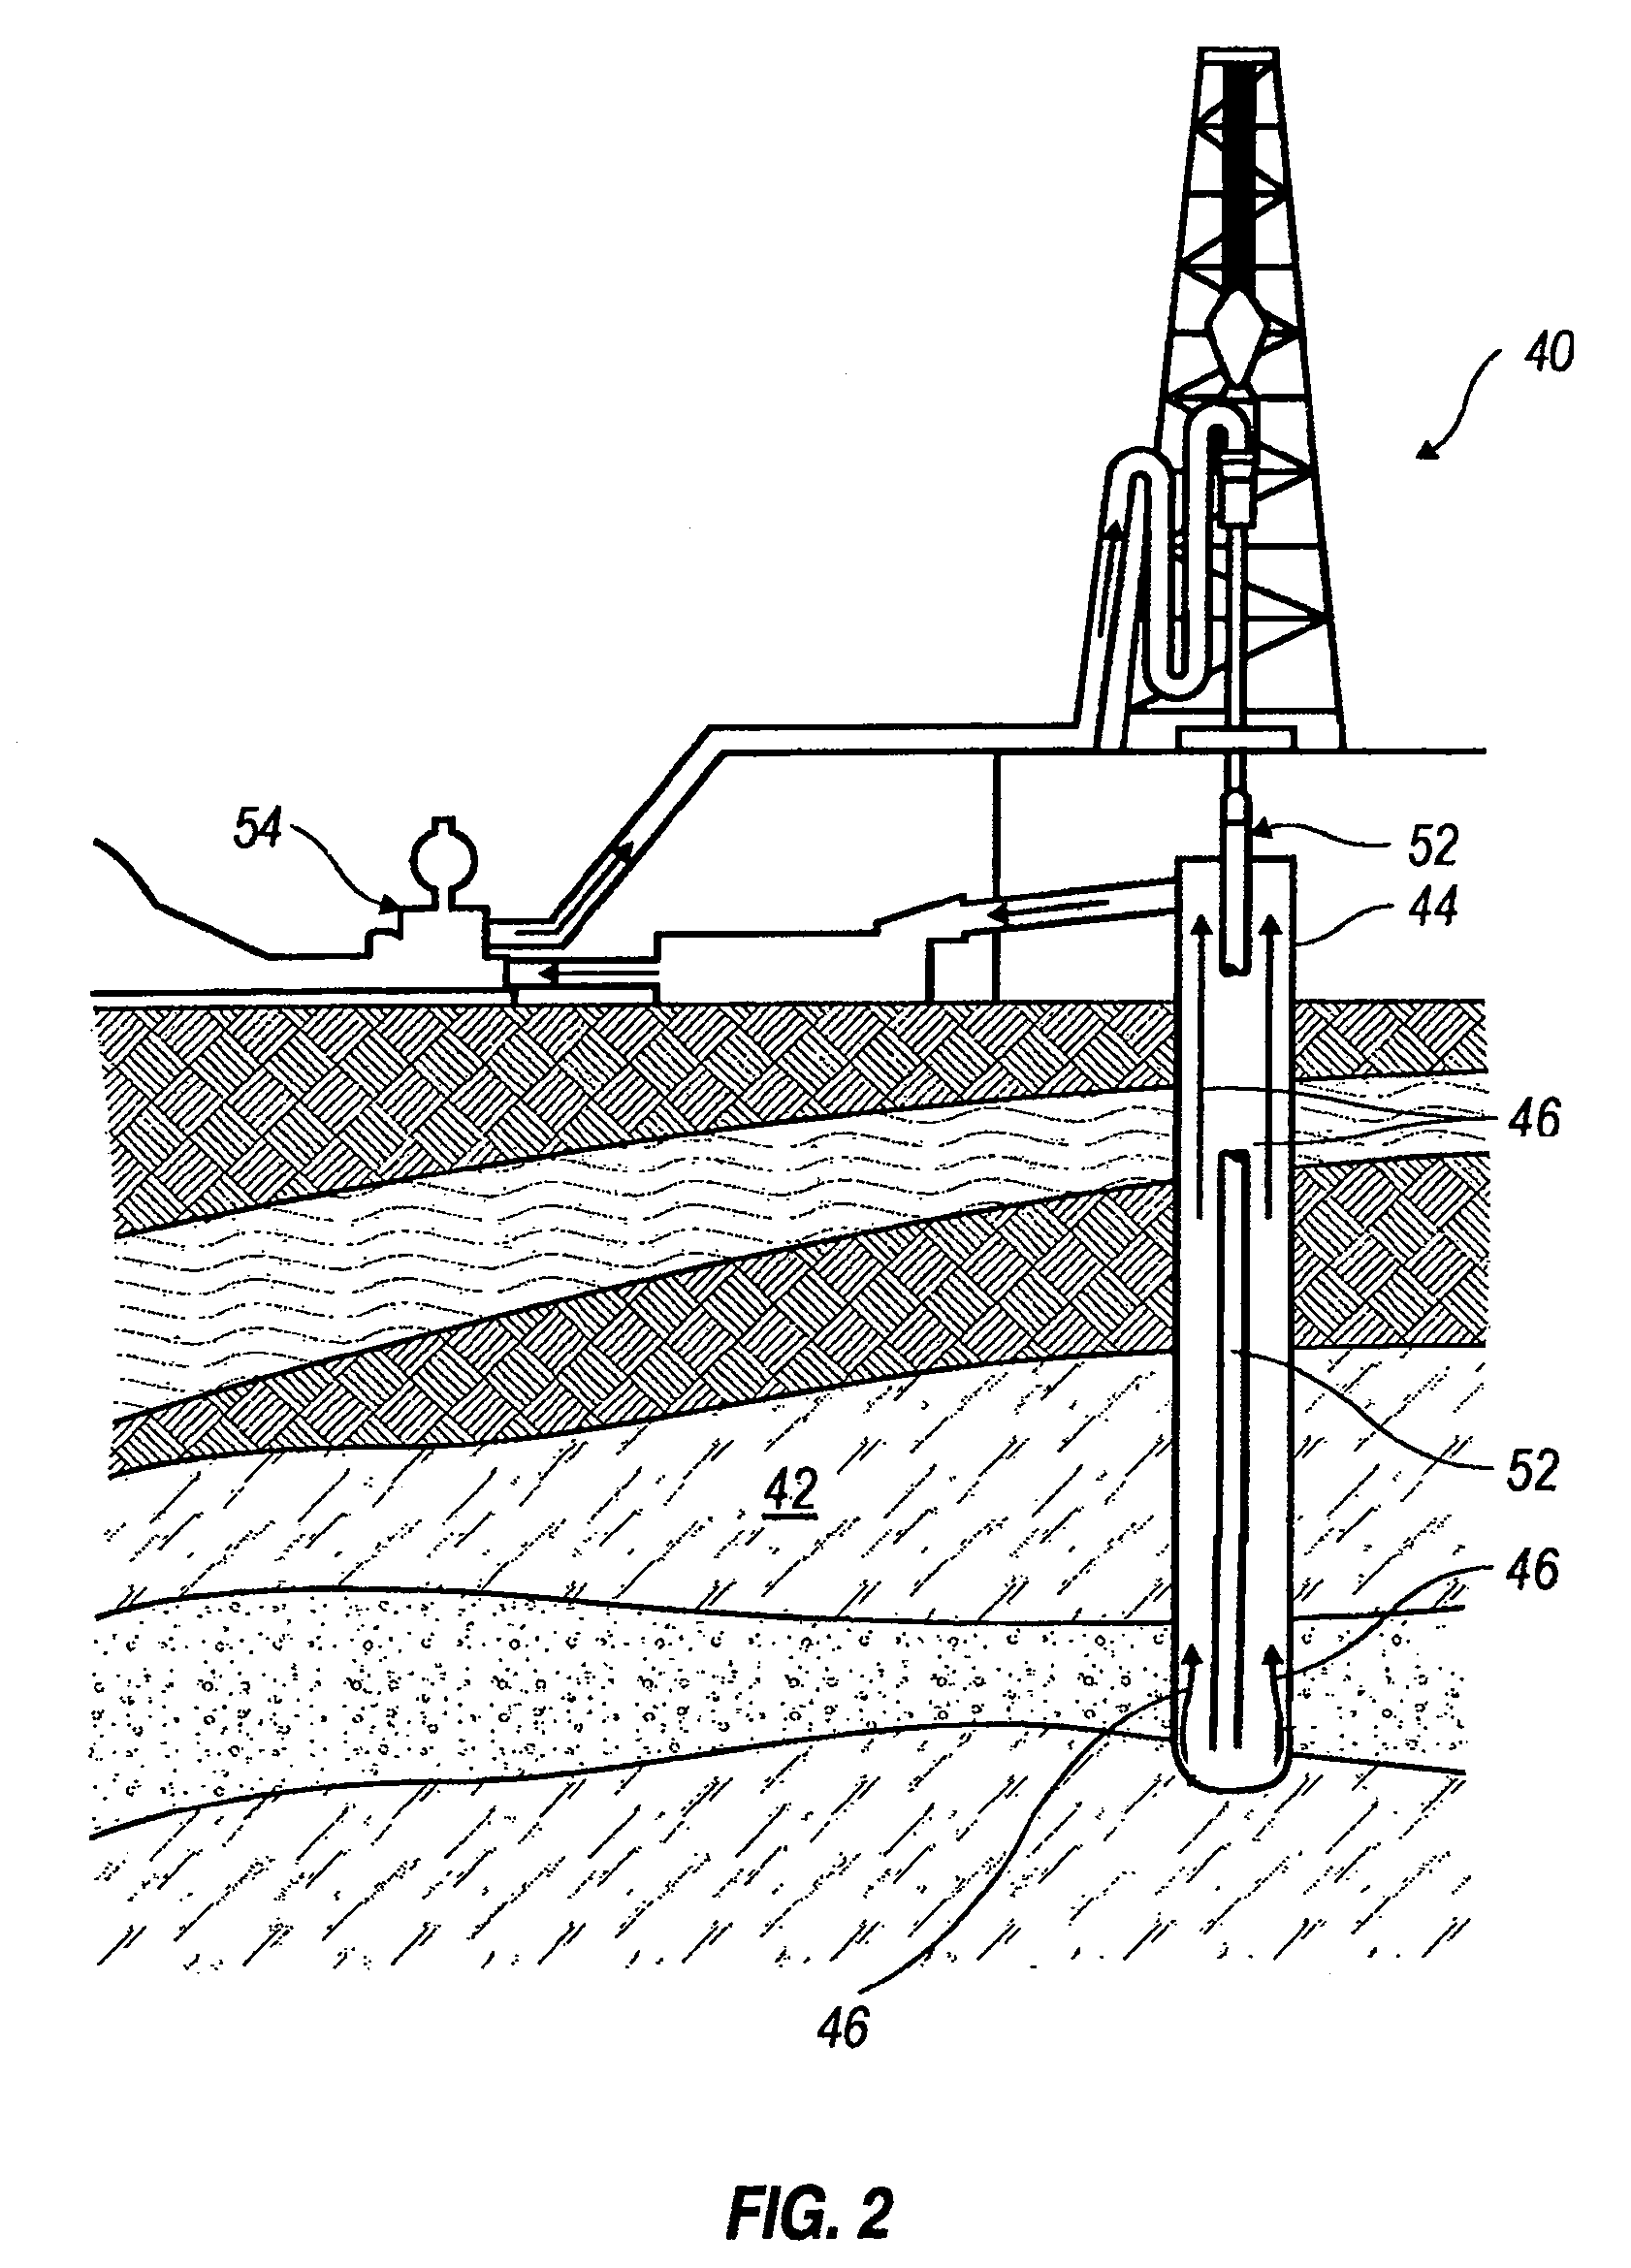 Methods of retarding the setting of a cement composition using biodegradable monomers